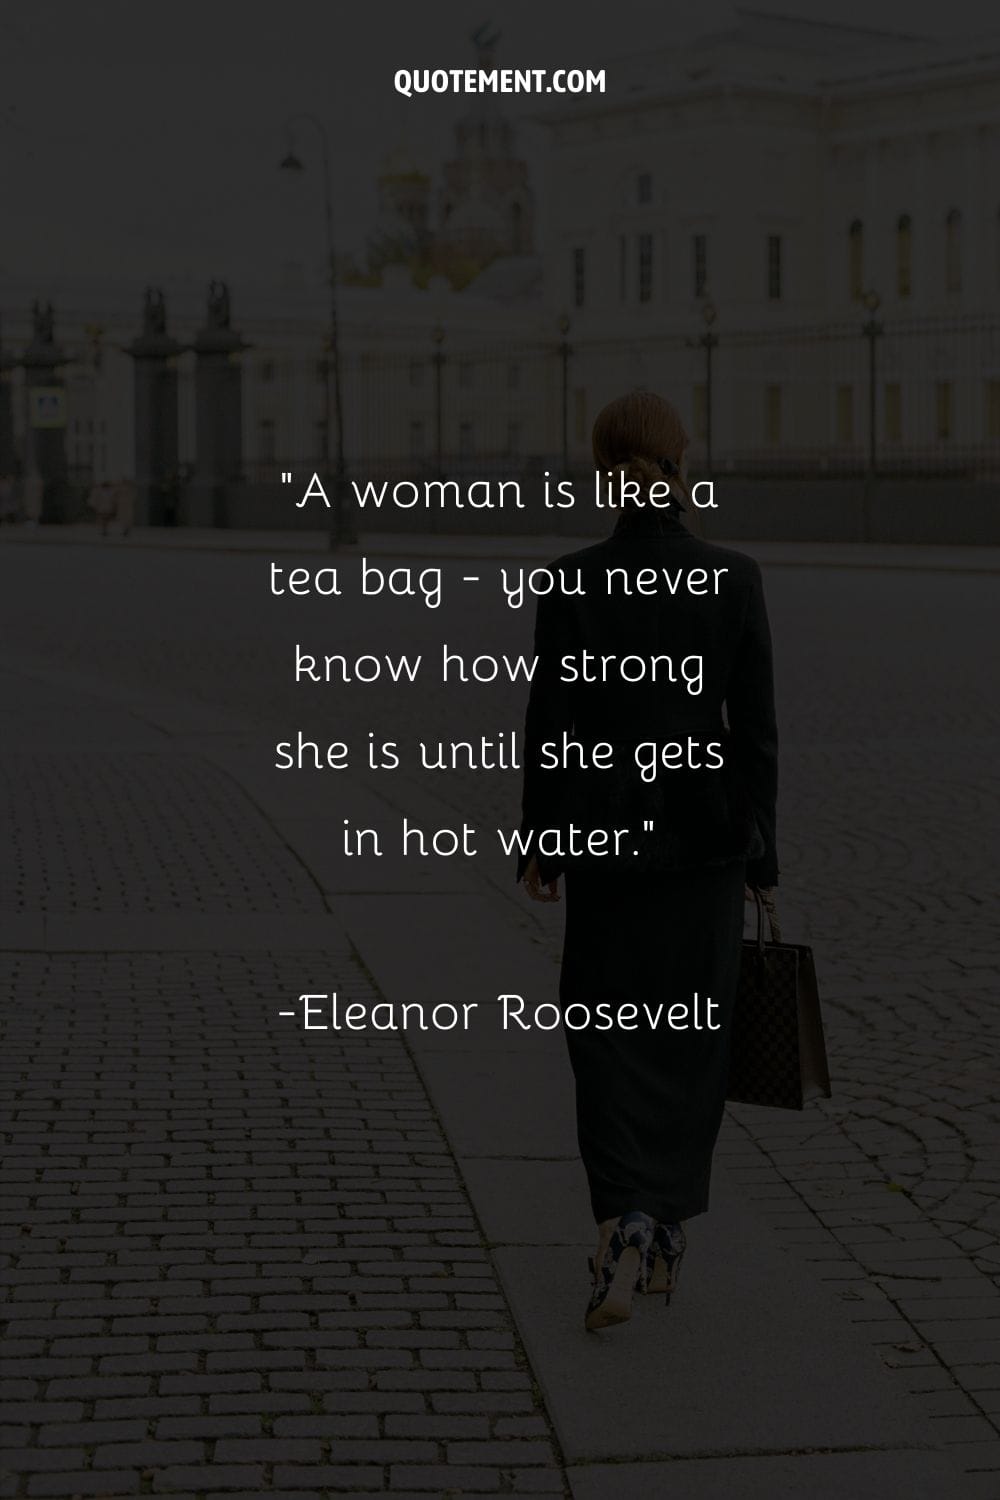 Portrayal of a refined beauty in formal wear representing strong woman quote.